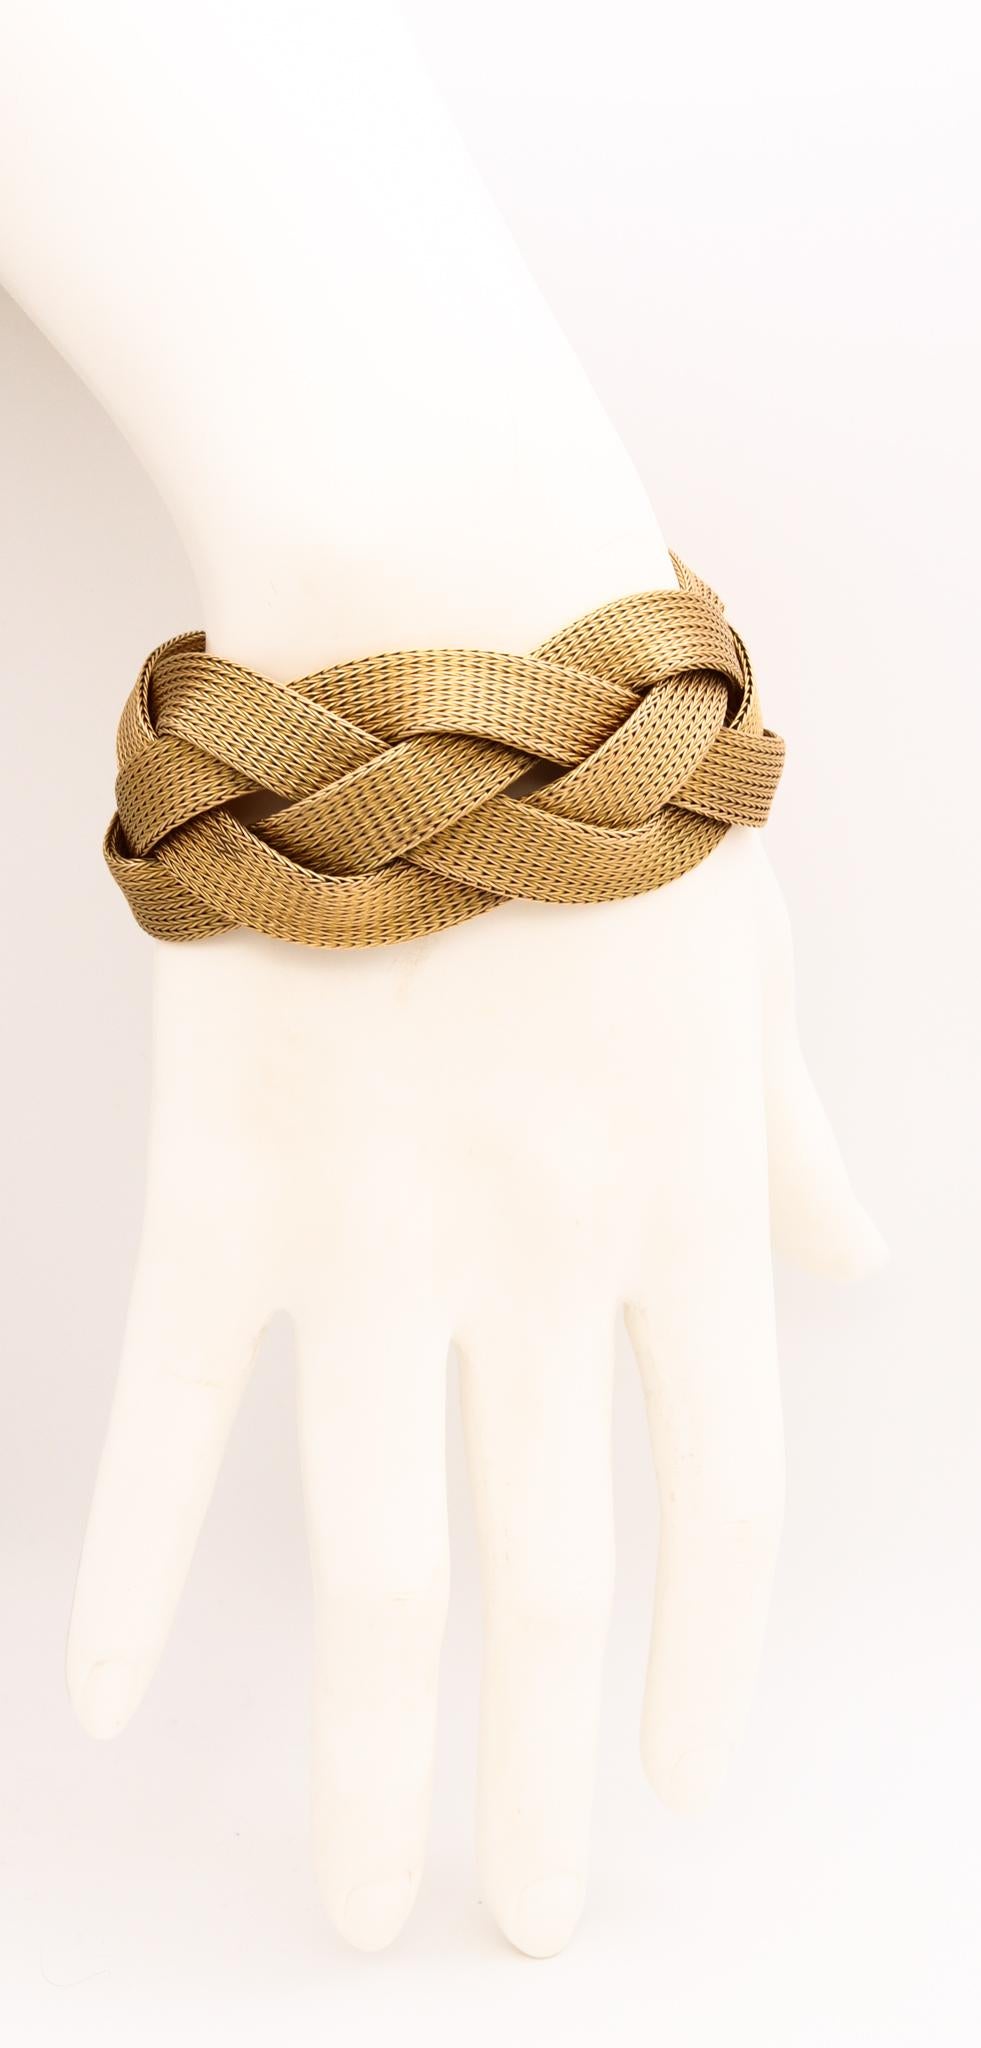 Unusual Italian mid-century braided bracelet.

Gorgeous over-sized designer's bracelet created in Italy immediately after the war, circa 1950. This beautiful and unusual piece was crafted in solid yellow gold of 18 karats. The design is composed by